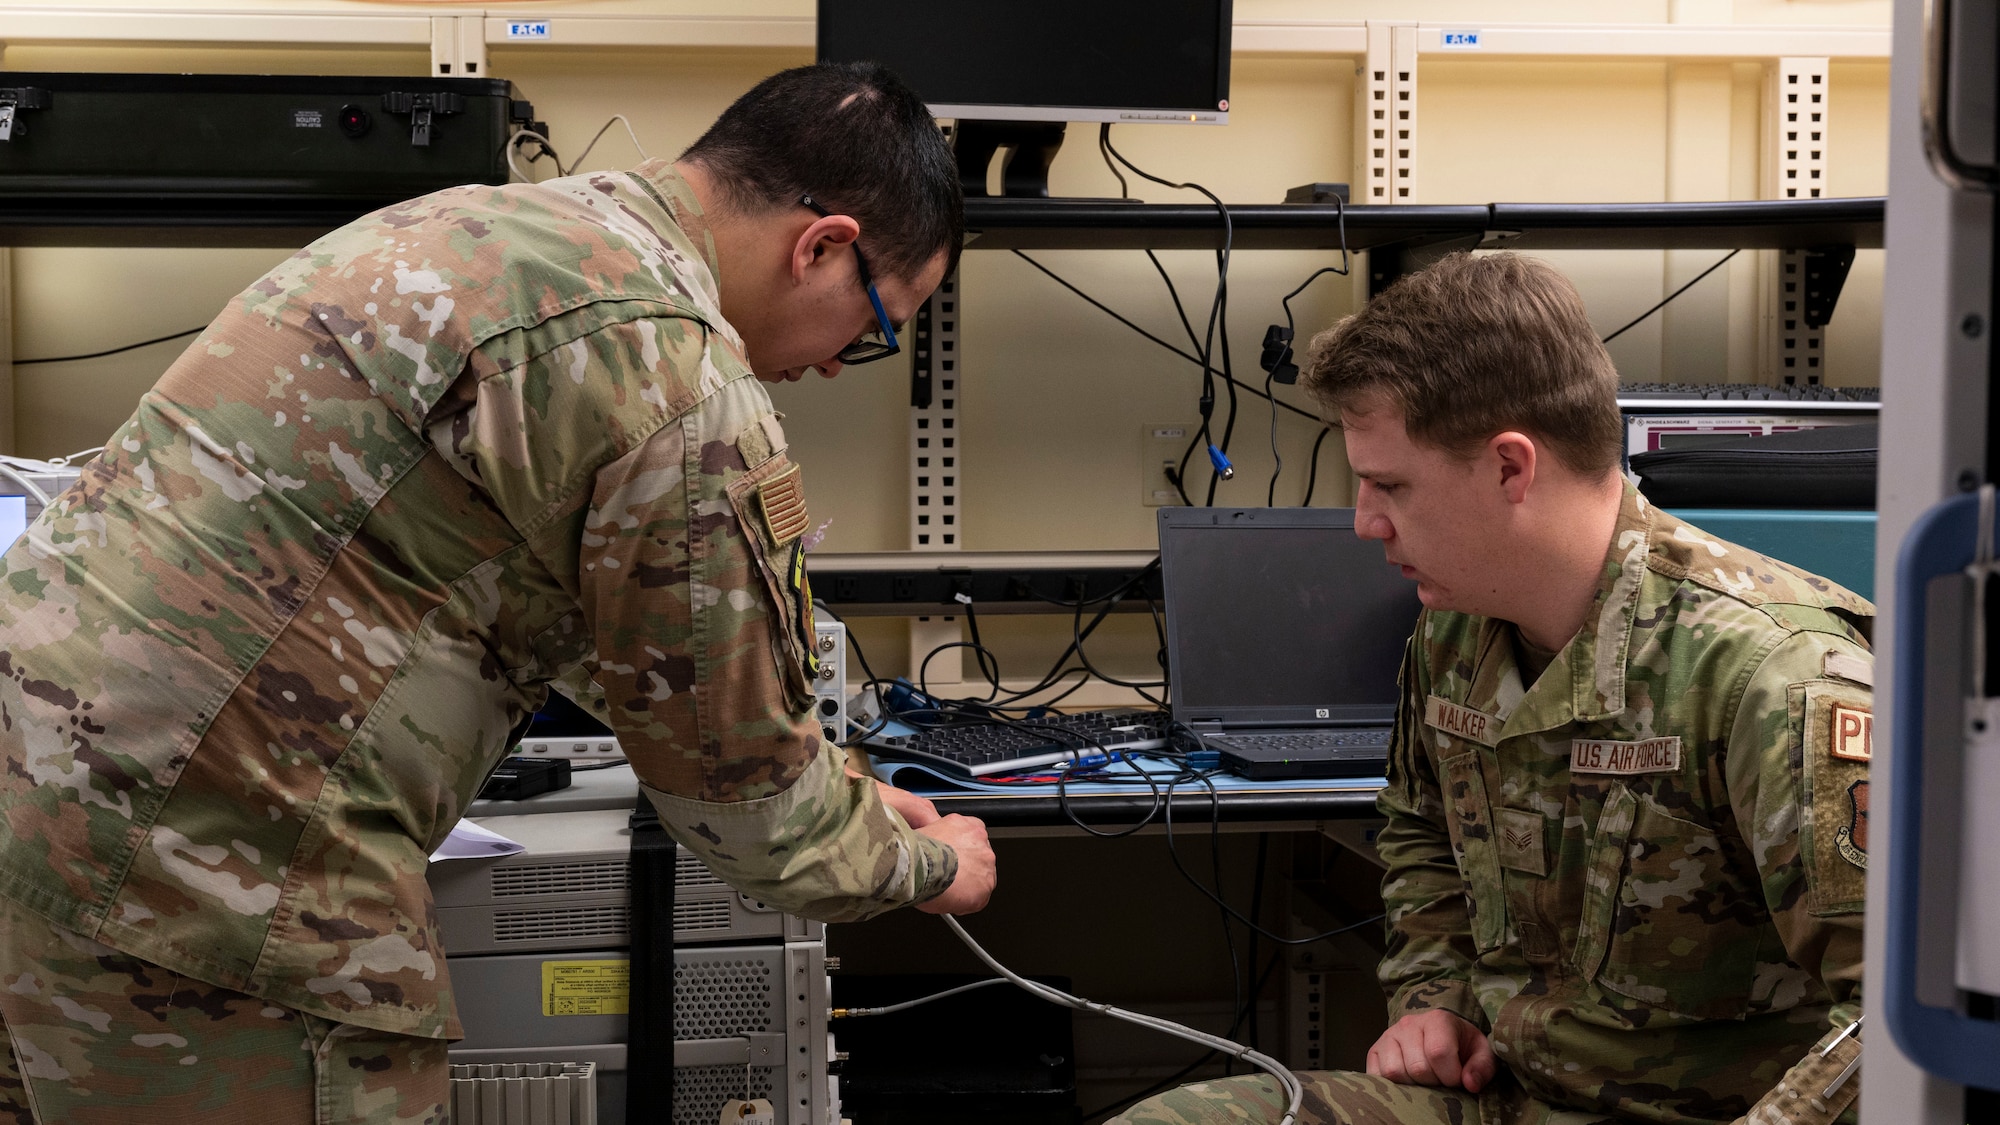 U.S. Air Force Senior Airman Joshua Pouncey, 49th Component Maintenance Squadron physical dimensional technician, left, trains U.S. Air Force Senior Airman Walker, 49th CMS physical dimensional technician, on how to use a Joint Services Electronic Combat Systems Tester at Holloman Air Force Base, New Mexico, Jan. 6, 2023. Airmen from the precision measurement equipment laboratory flight are responsible for calibrating the equipment used by aircraft maintainers to ensure it’s in working order and set to the exact measurements. (U.S. Air Force photo by Airman 1st Class Nicholas Paczkowski)